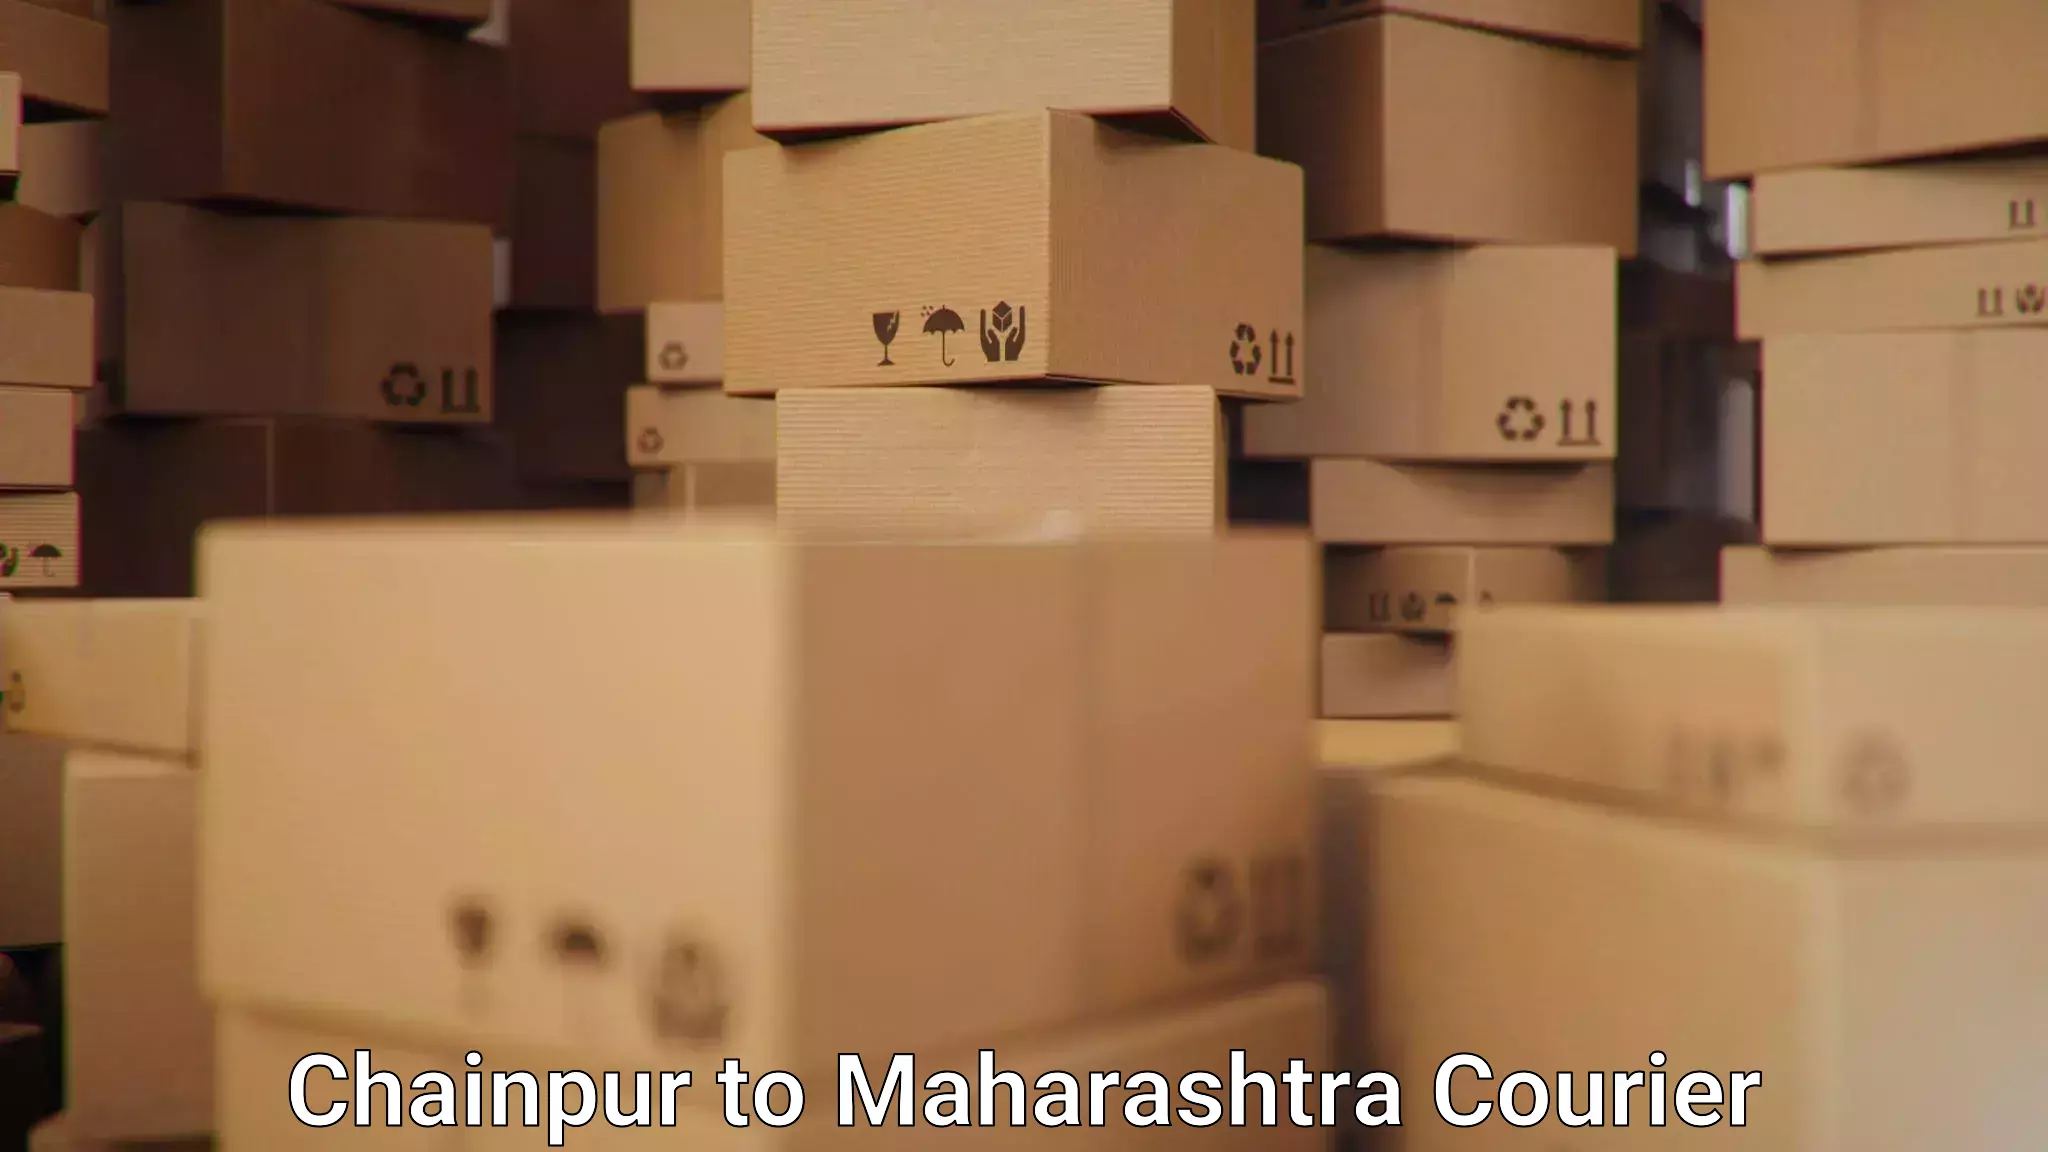 Global shipping solutions Chainpur to Maharashtra